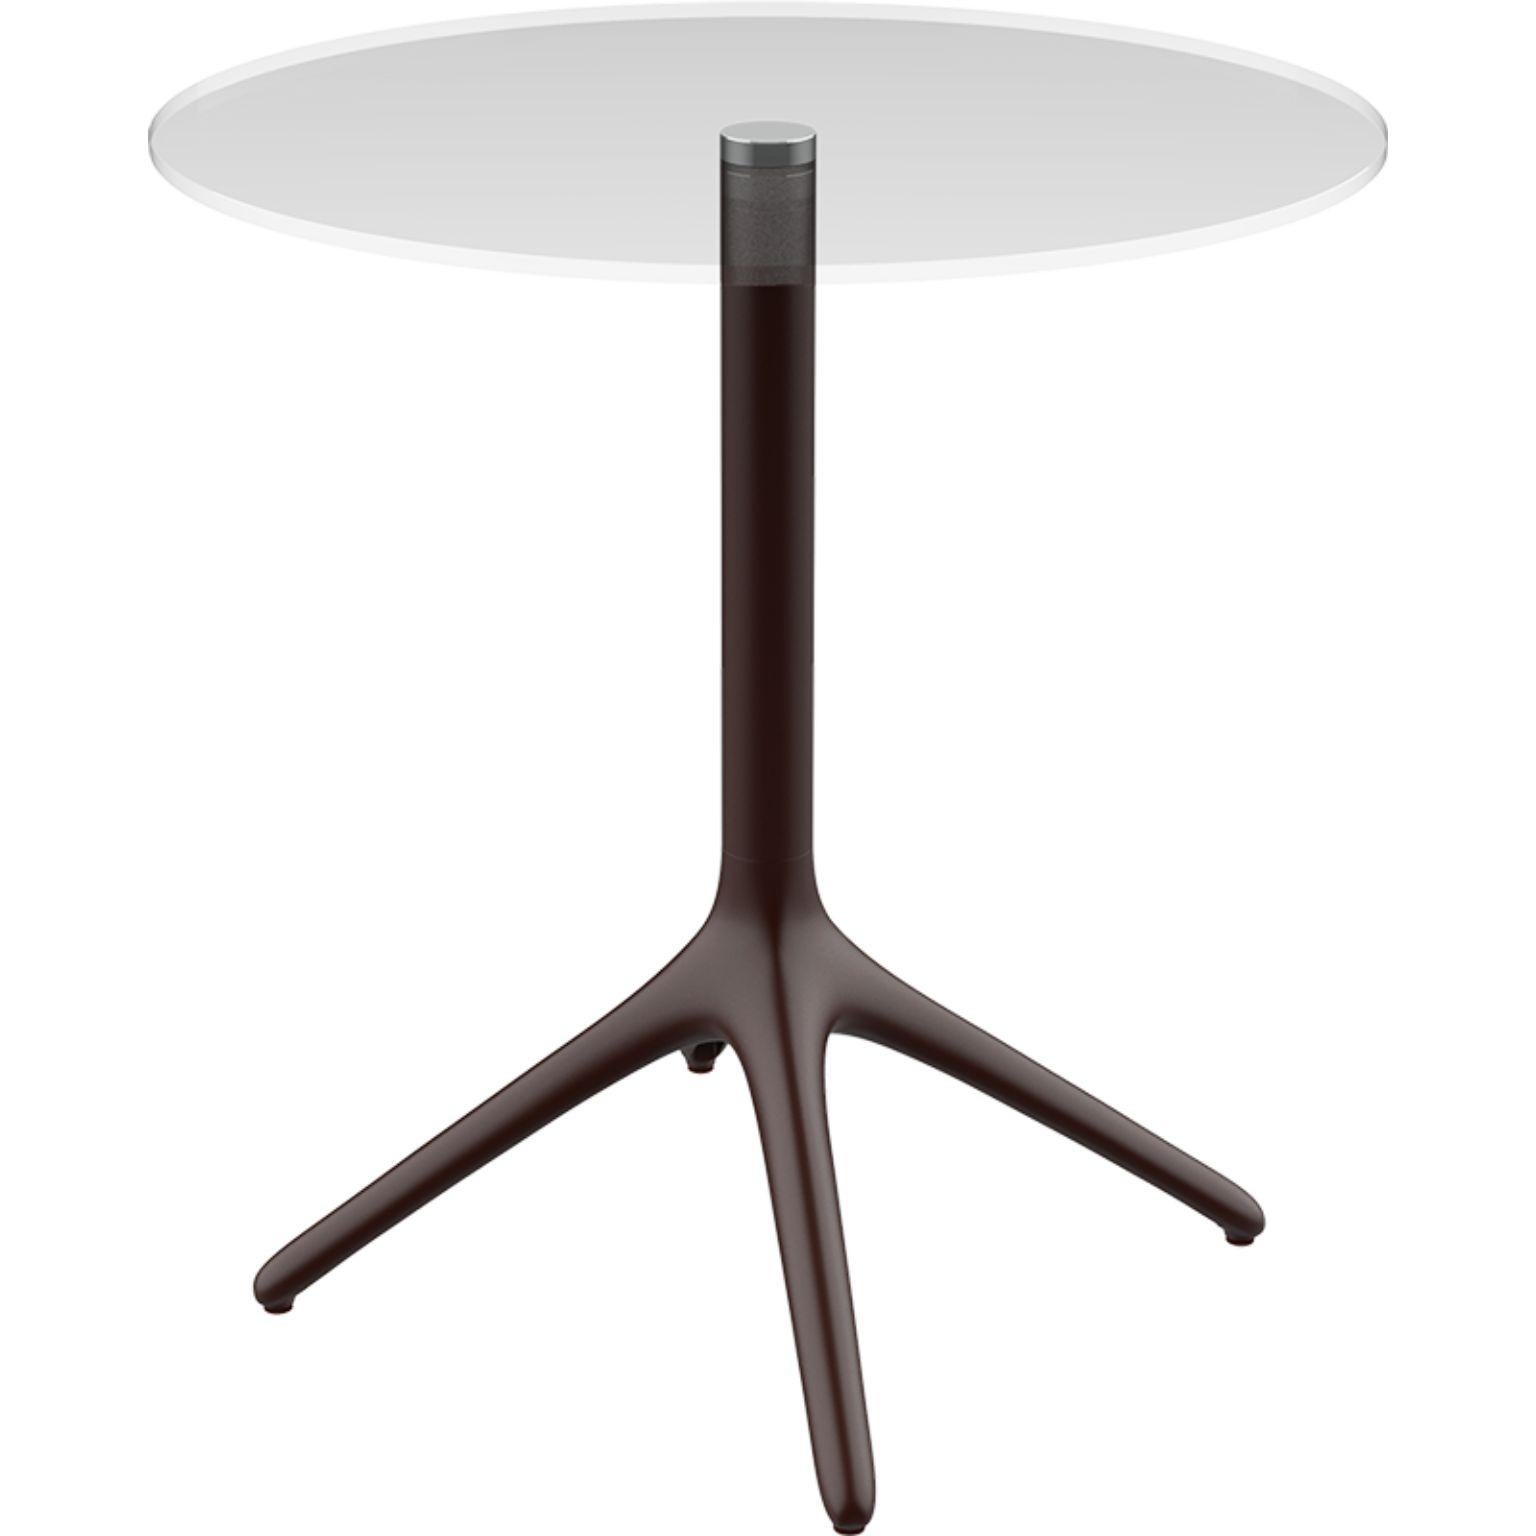 Uni chocolate table 73 by Mowee.
Dimensions: D45.5 x H73 cm.
Material: Aluminium, tempered glass.
Weight: 5.5 kg.
Also Available in different colours and finishes. Collapsable version available. 

A table designed to be as versatile as